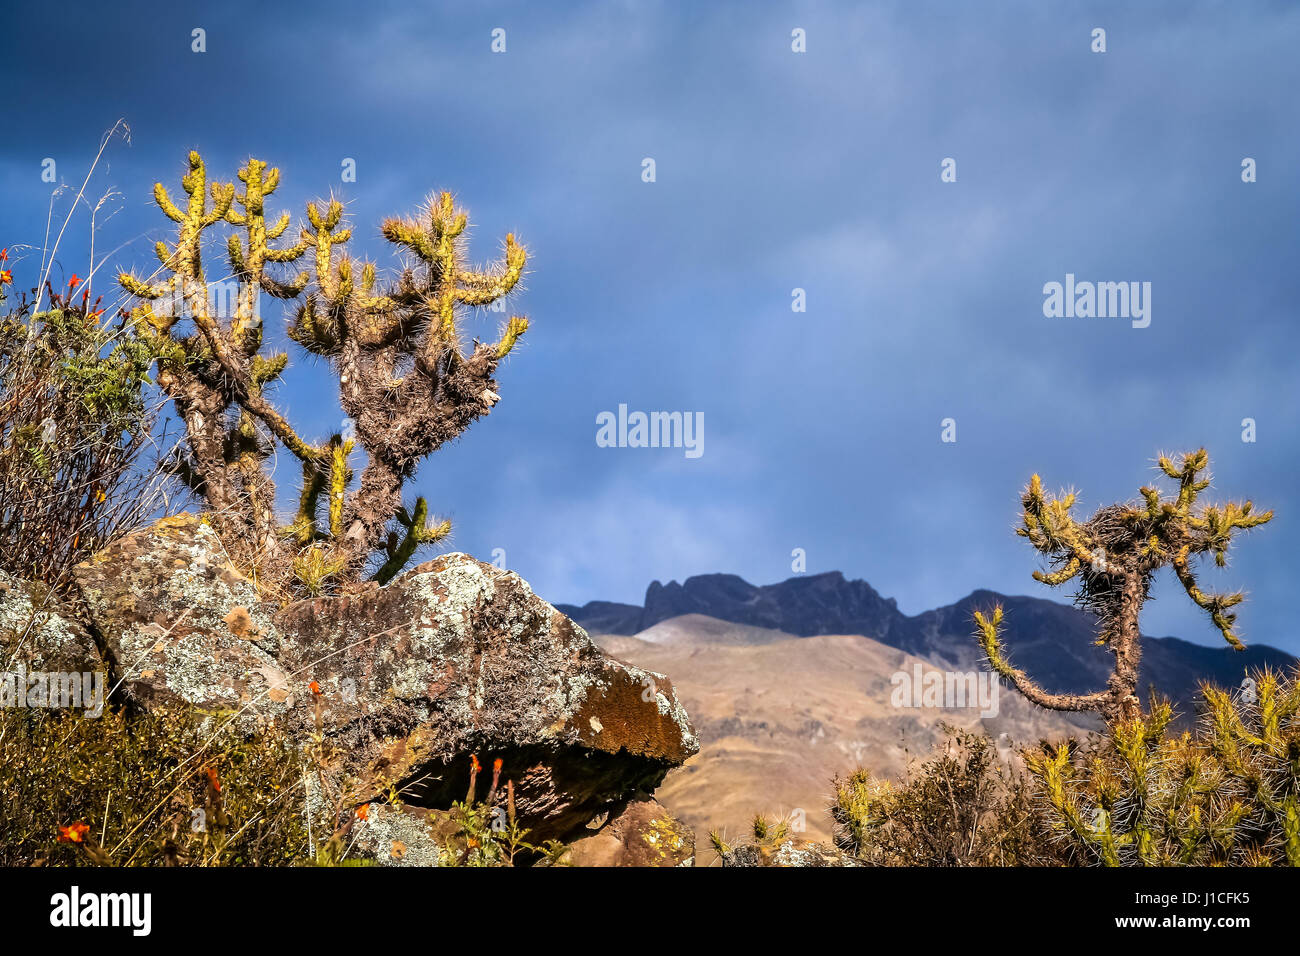 Cactuses growing on the rocks in the Colca Canyon in Peru Stock Photo